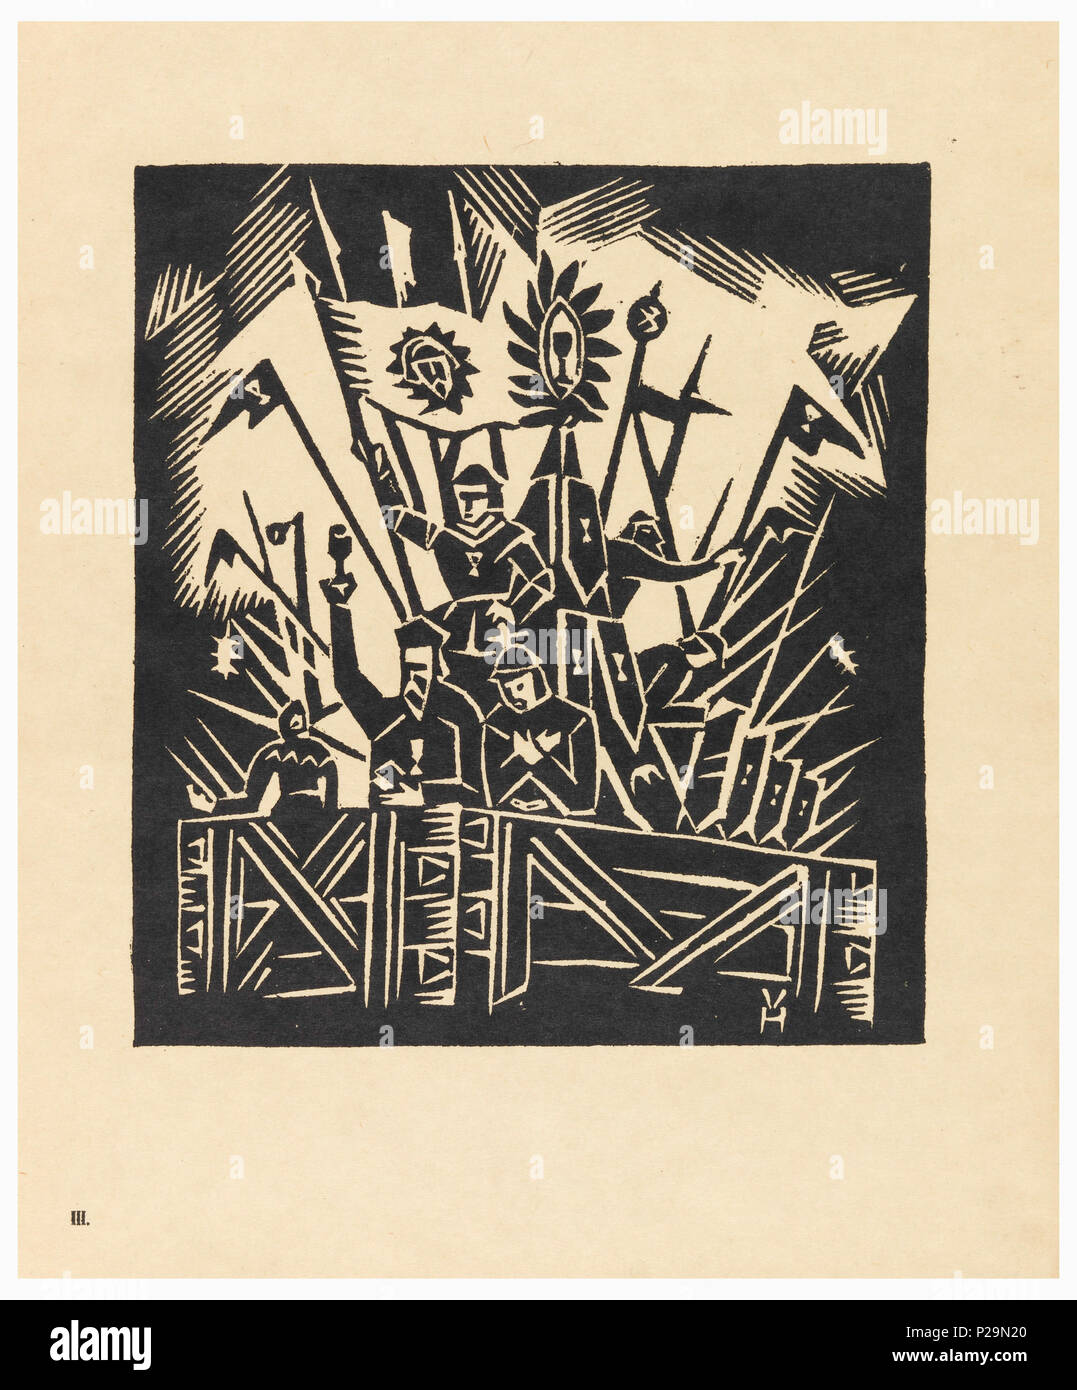 .  English: Print, Husite, Plate III, 'Sest Dob Nashi Historie' Portfolio, 1921 .  English: Vertical rectangle. Several figures with weapons and banners on a platform. Two figures standing at the front; on left one man with arm raised, on right, another man with arms crossed over chest. . 1921 268 Print, Husite, Plate III, &quot;Sest Dob Nashi Historie&quot; Portfolio, 1921 (CH 18684939) Stock Photo